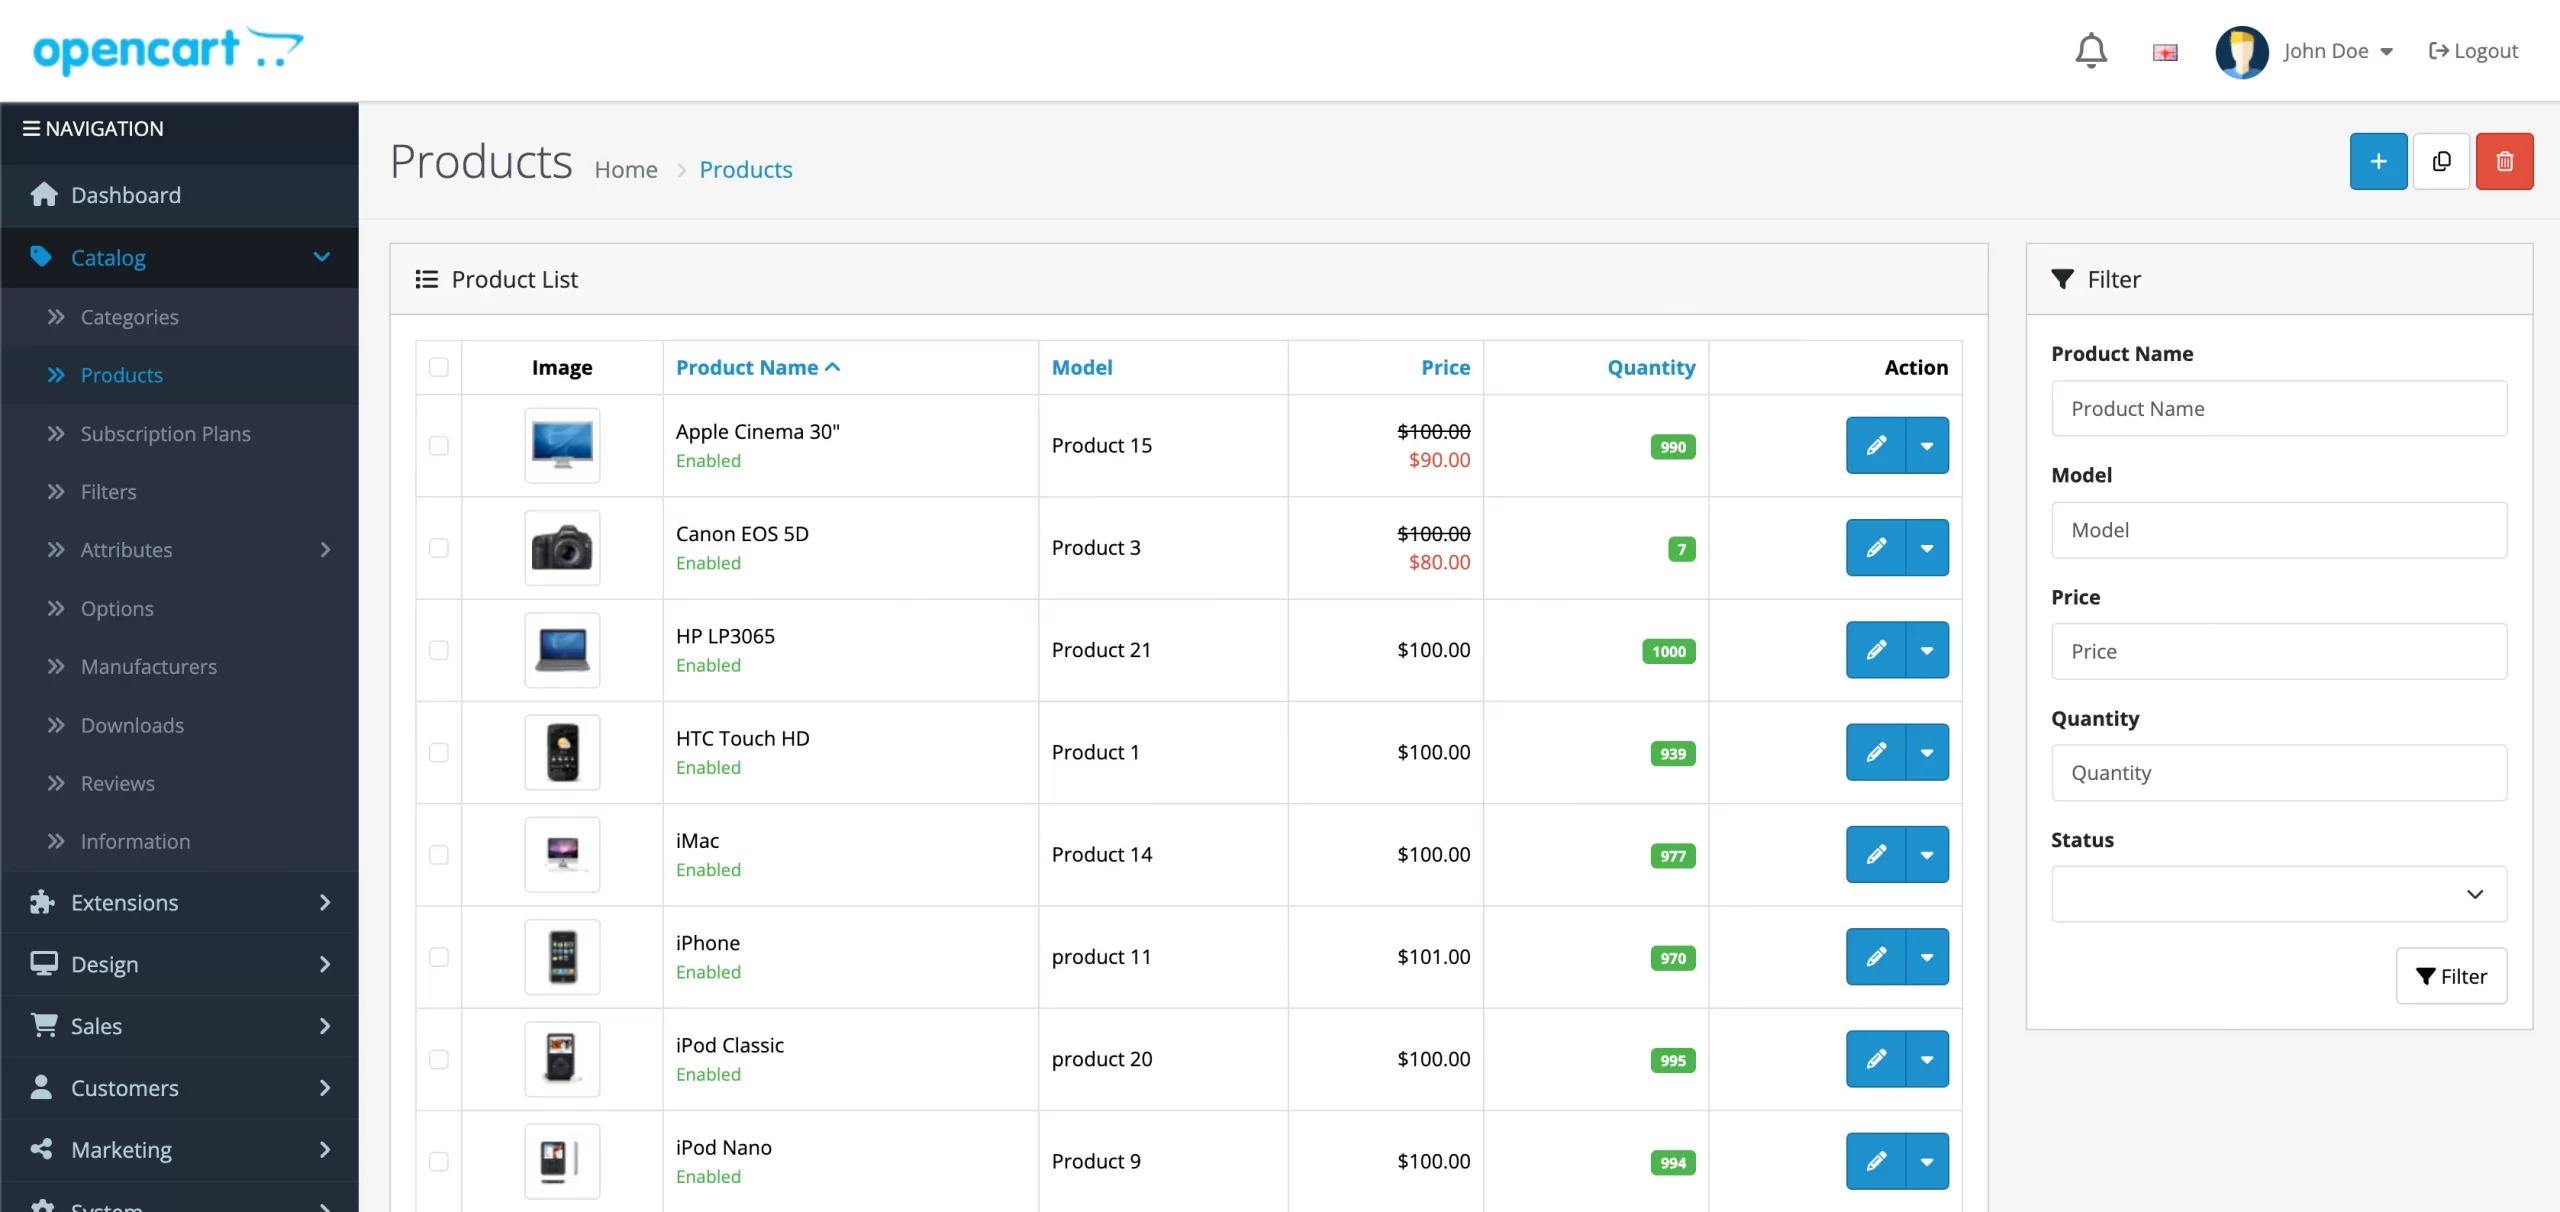 Product management is easy via OpenCart dashboard